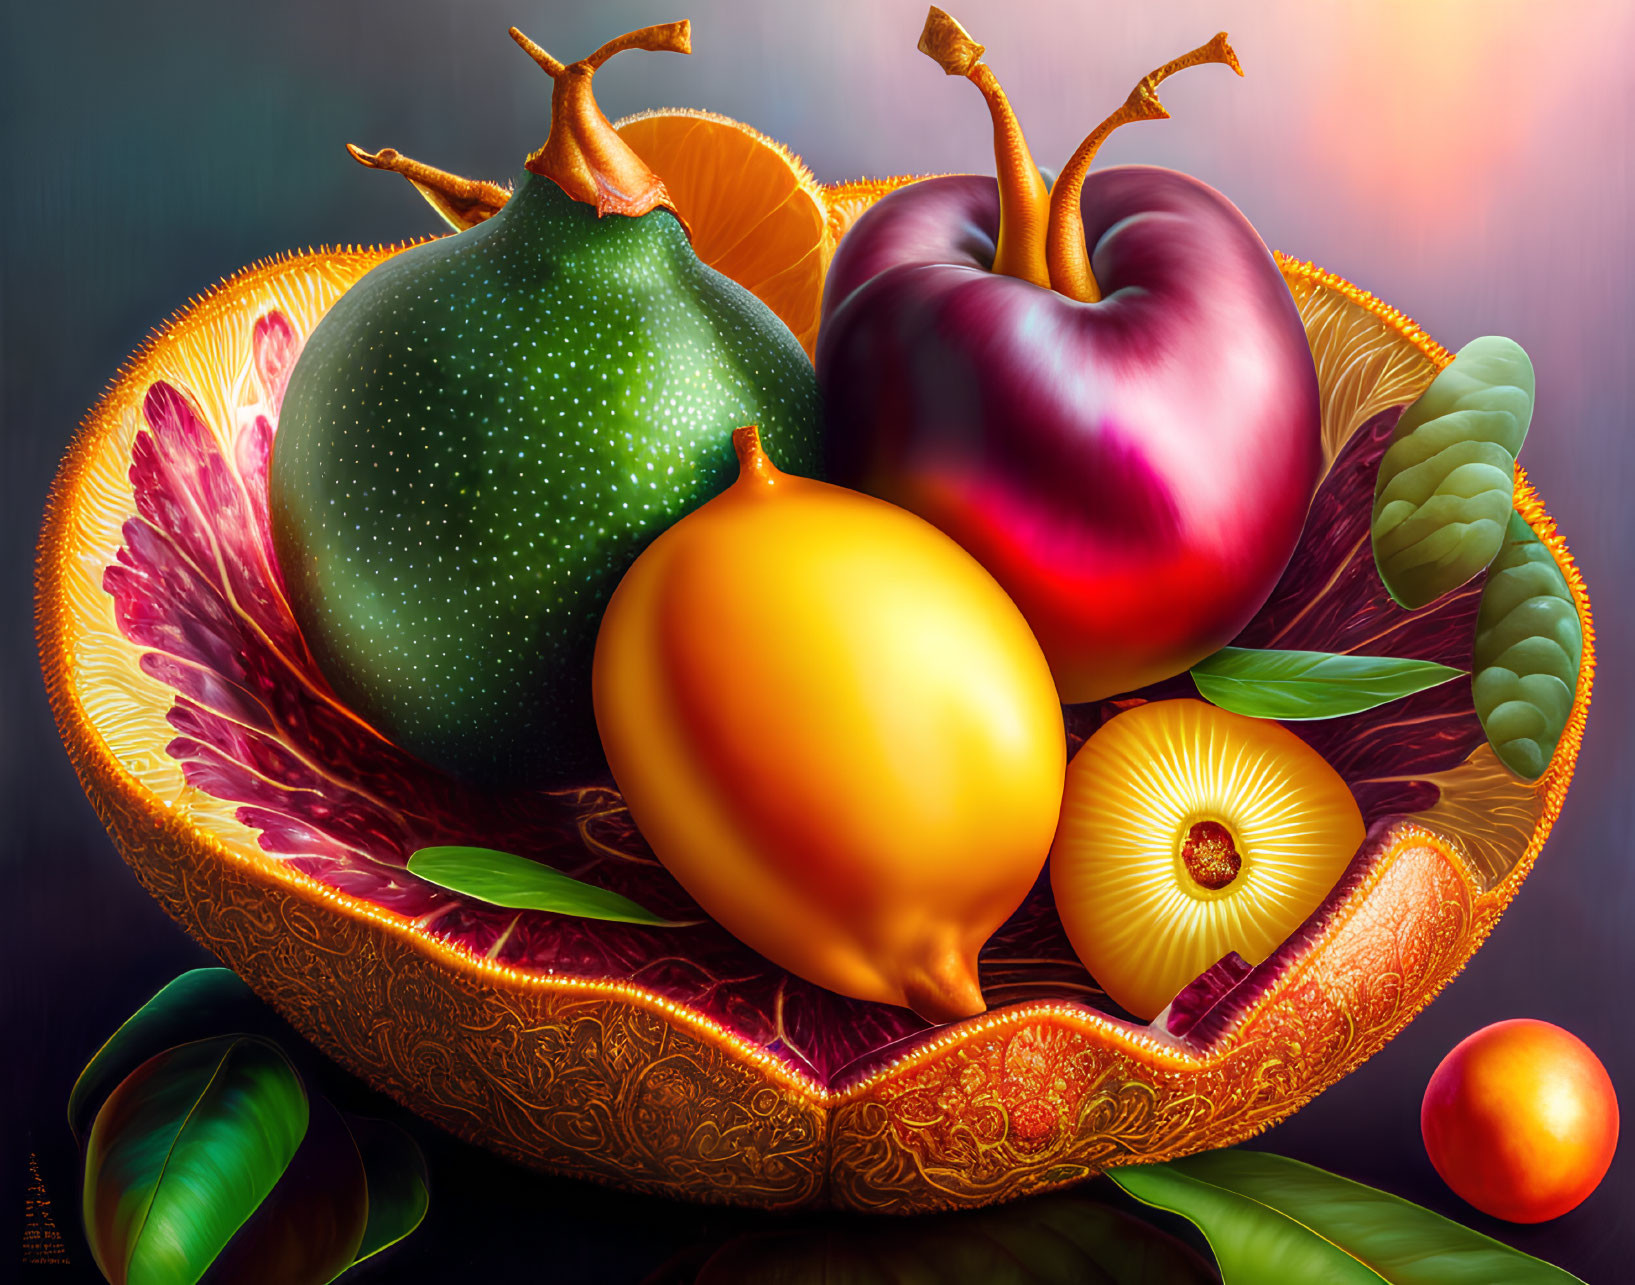 Colorful digital painting of a fruit bowl with pear, lemon, apple, and decorative leaves.